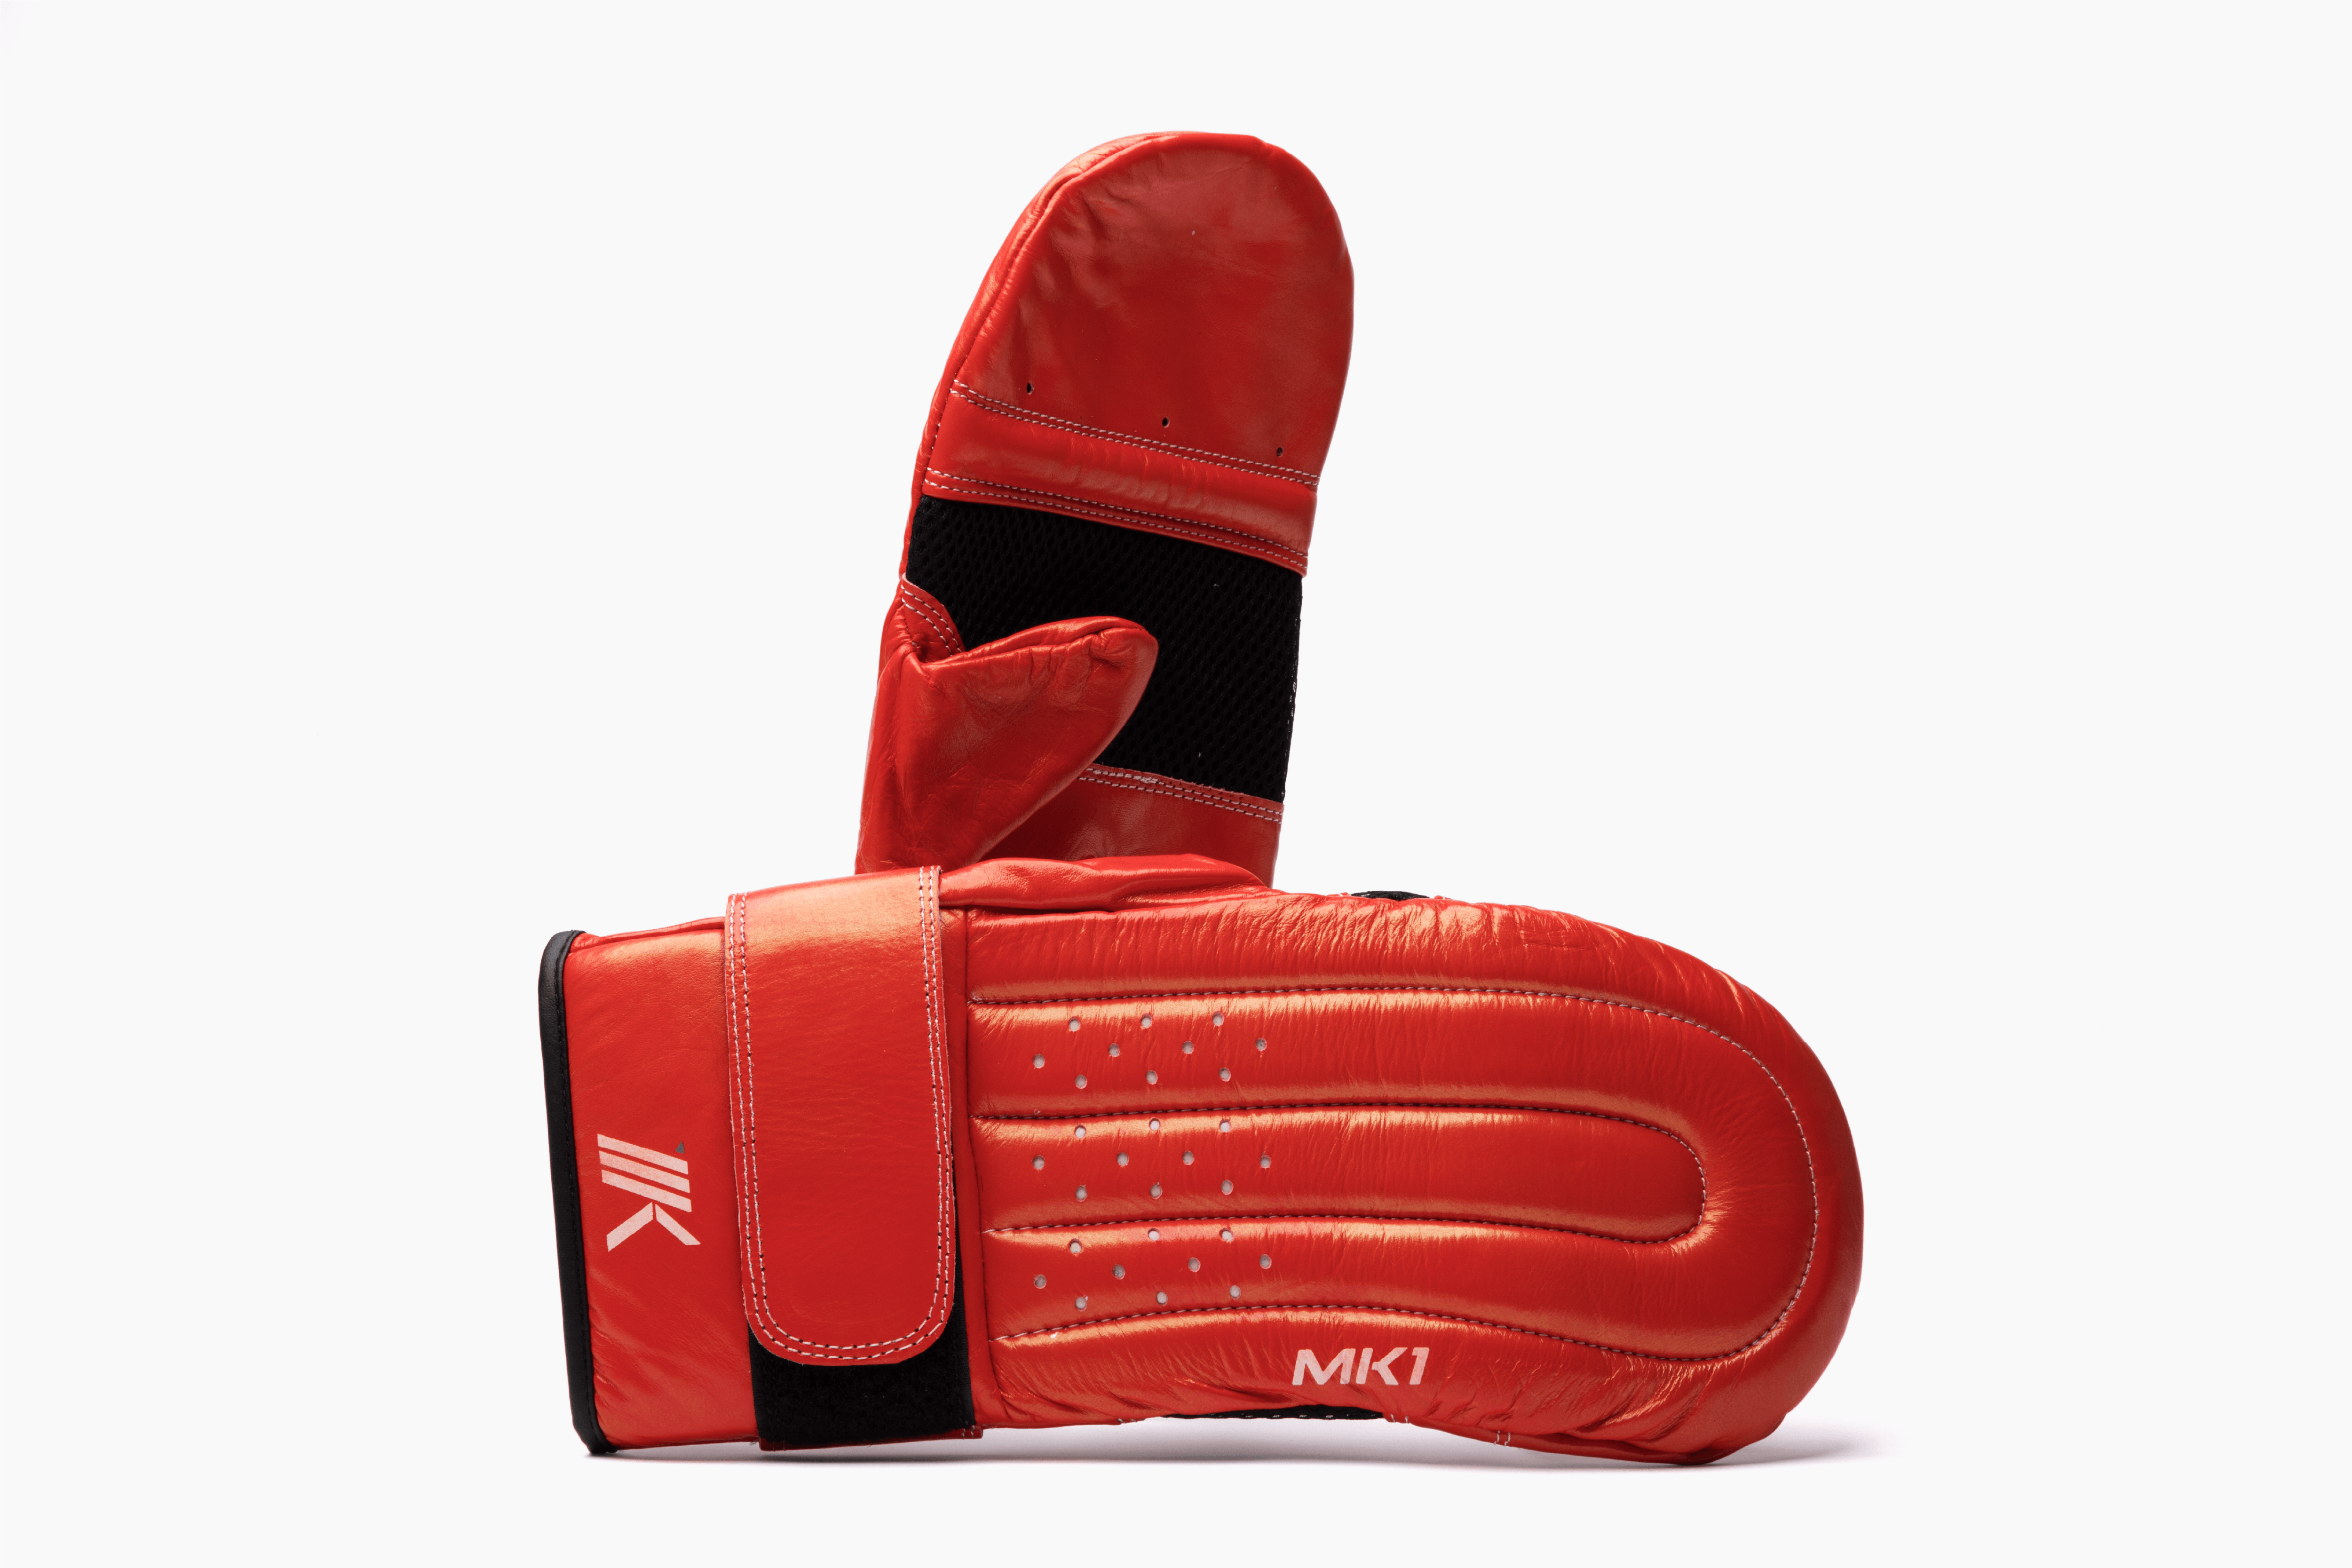 Sandee Bag Mitts | Premium Quality, Extremely Durable